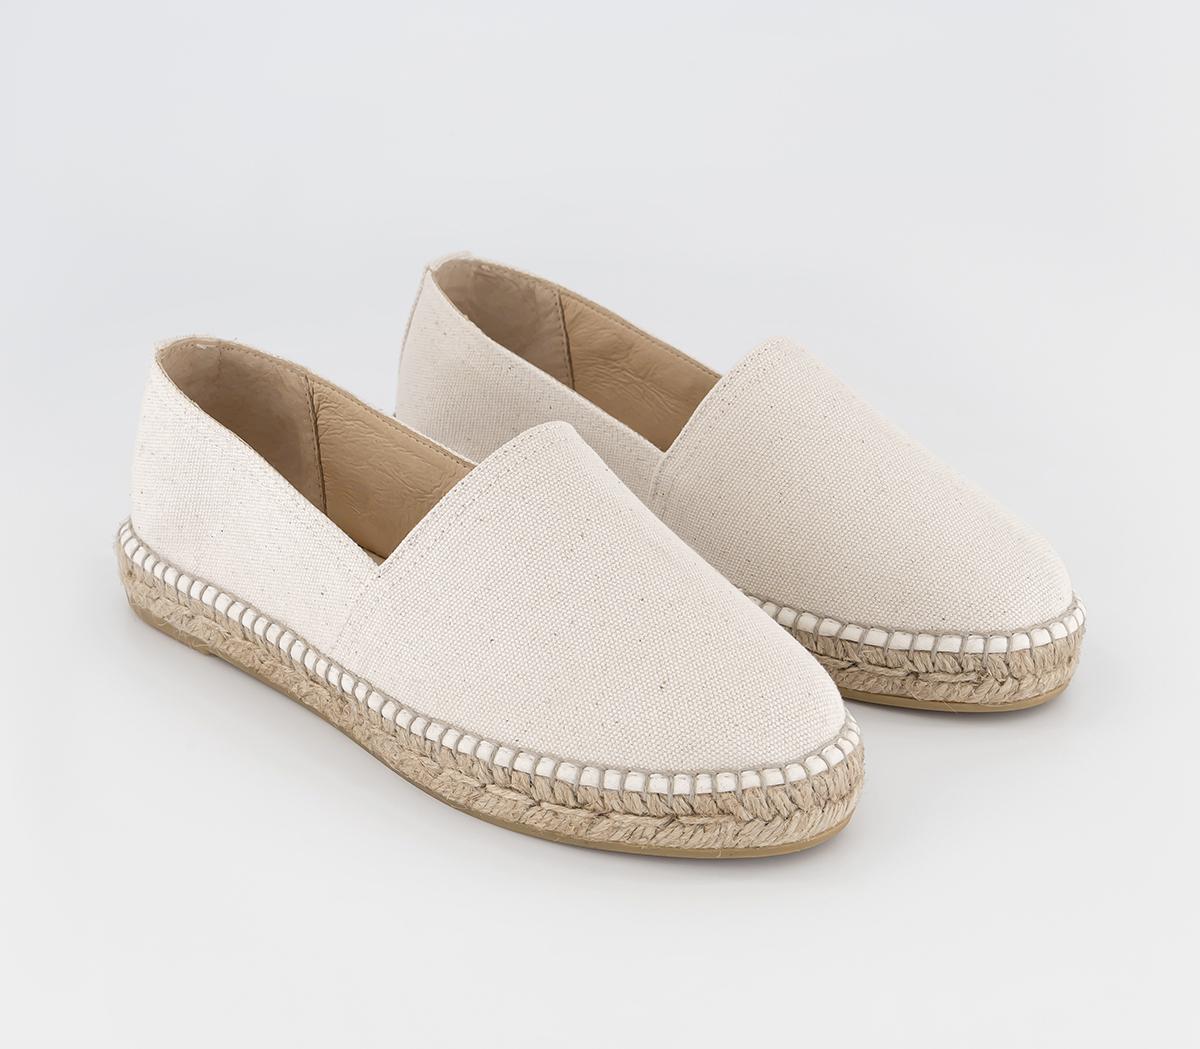 Gaimo For Office Womens Camping Slip On Espadrilles Cream Canvas Natural, 6